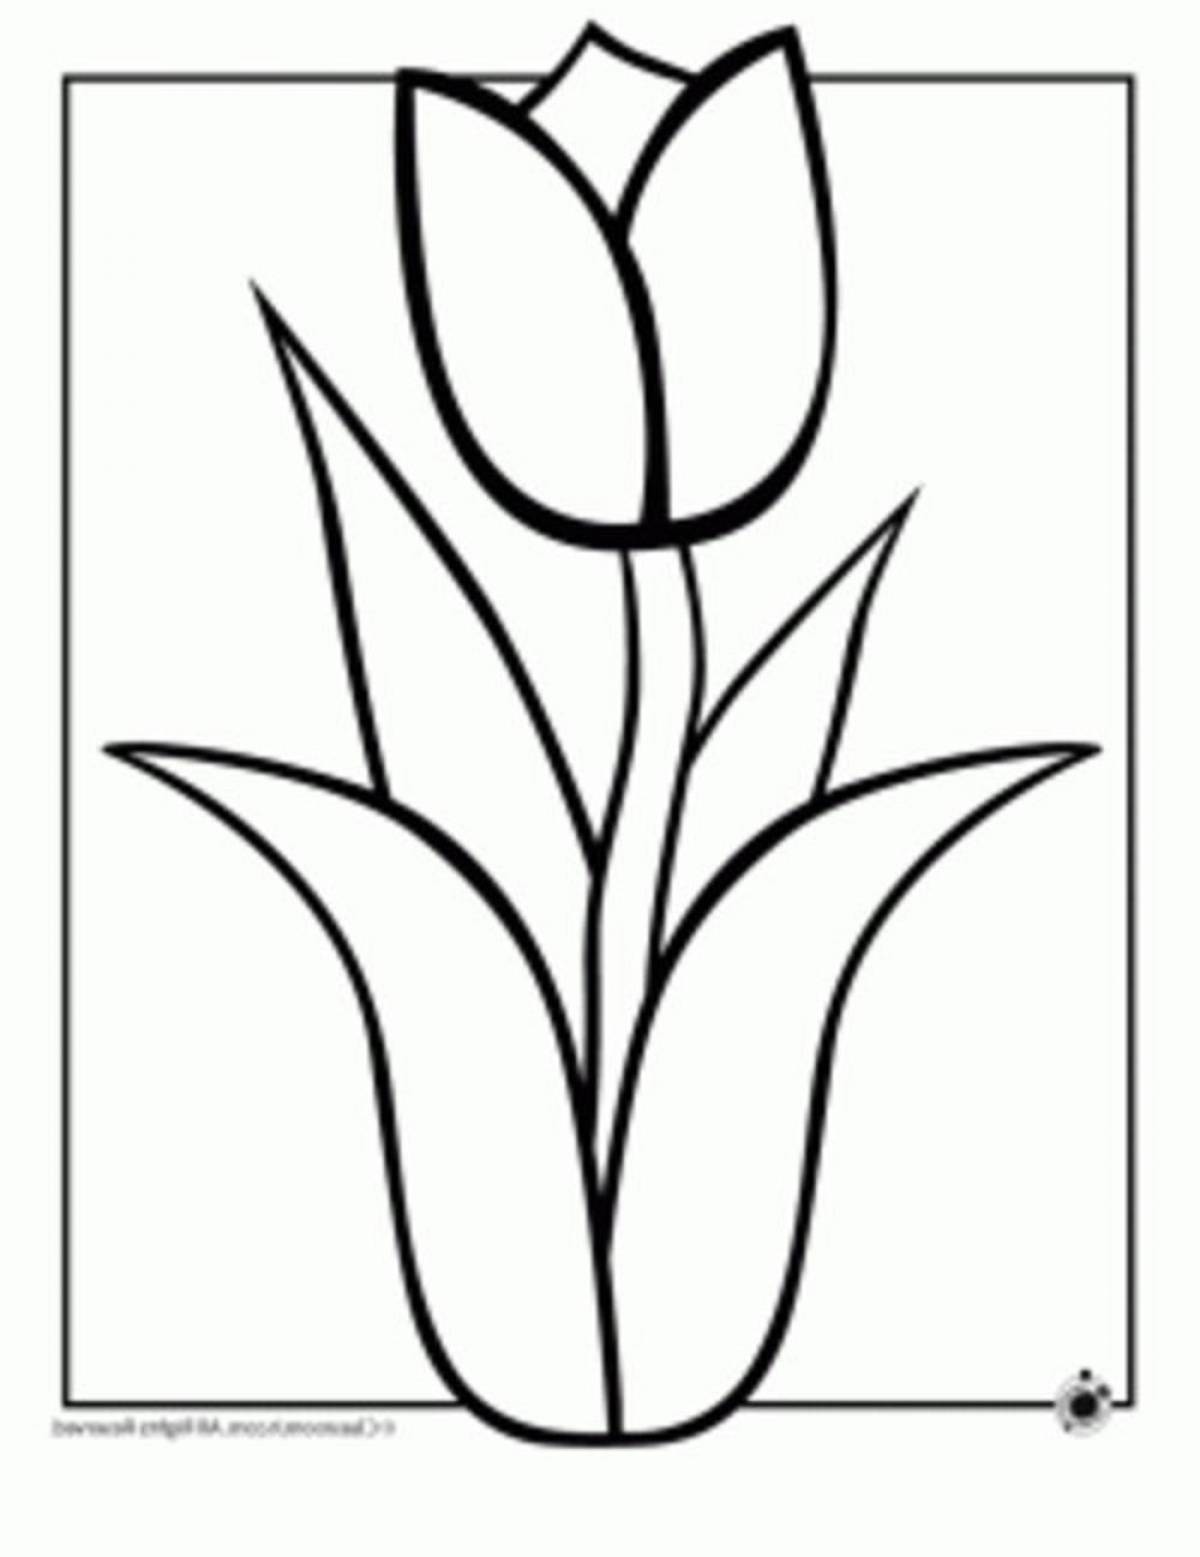 Awesome tulip coloring pages for preschoolers